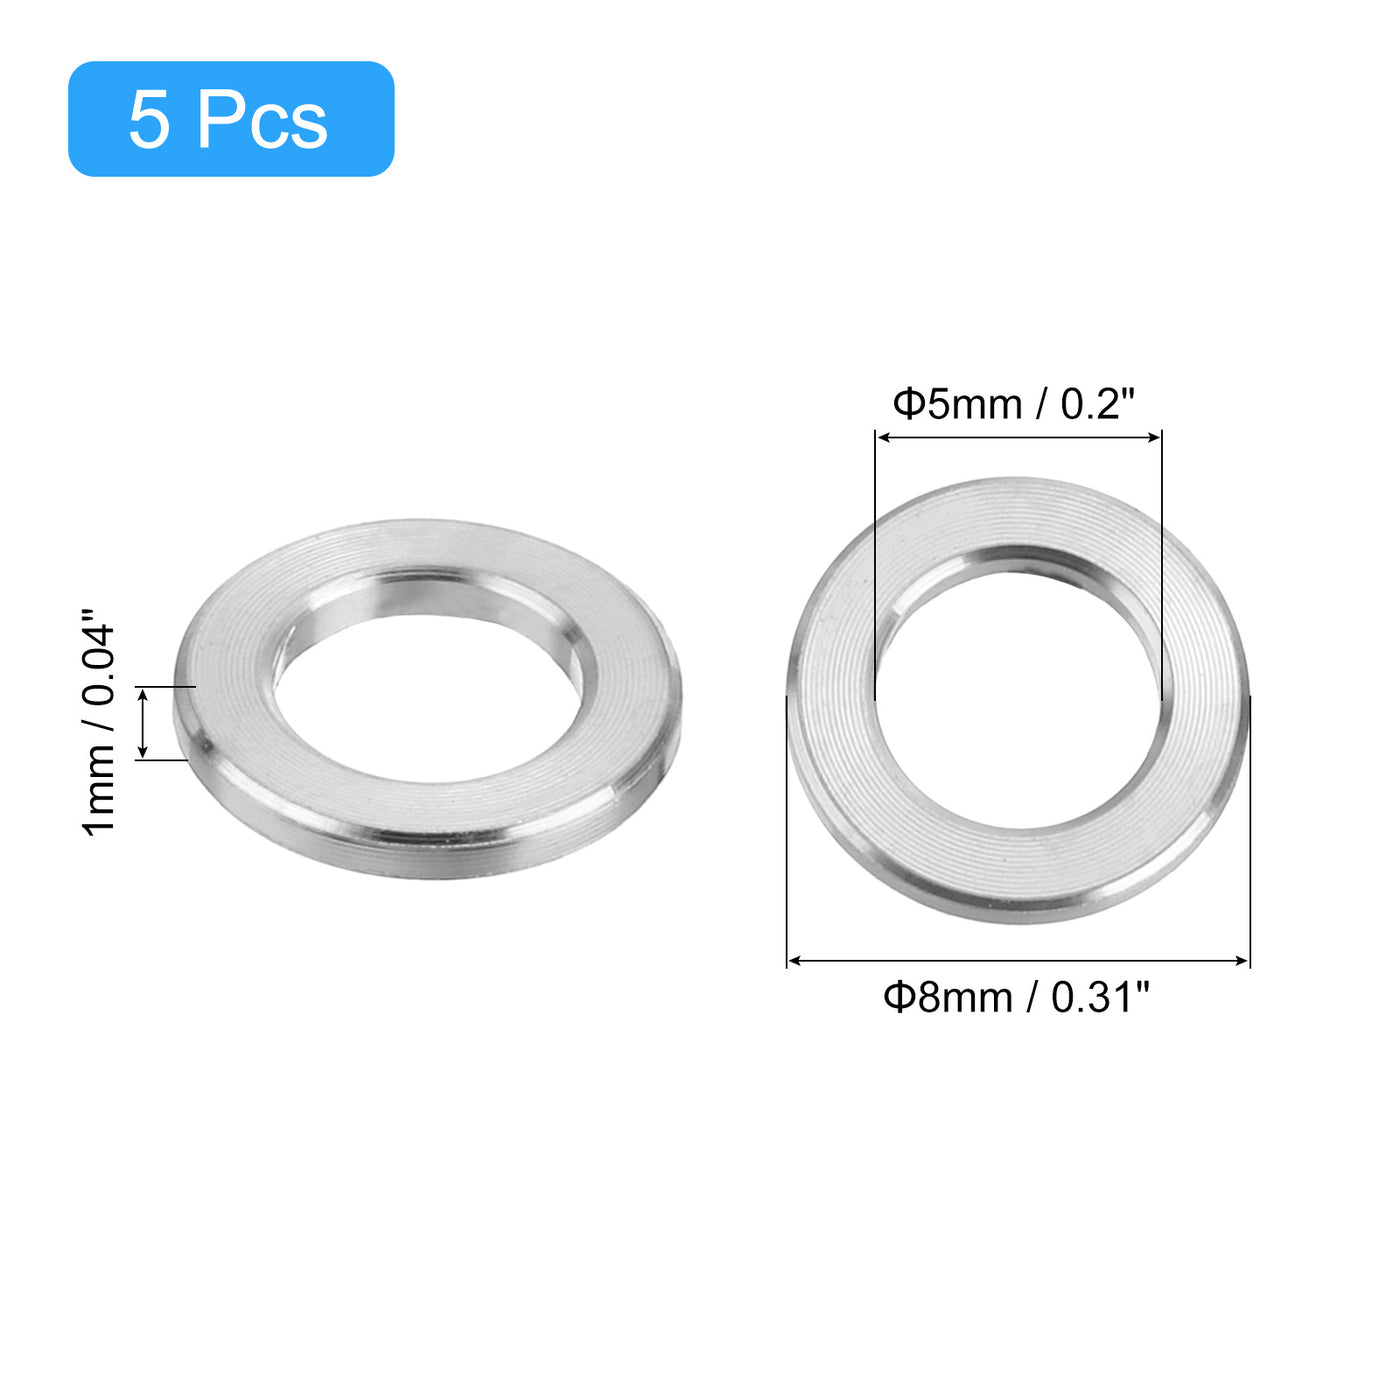 uxcell Uxcell 5 Pcs M5 Titanium Flat Washer Metric Flat Washer Silver